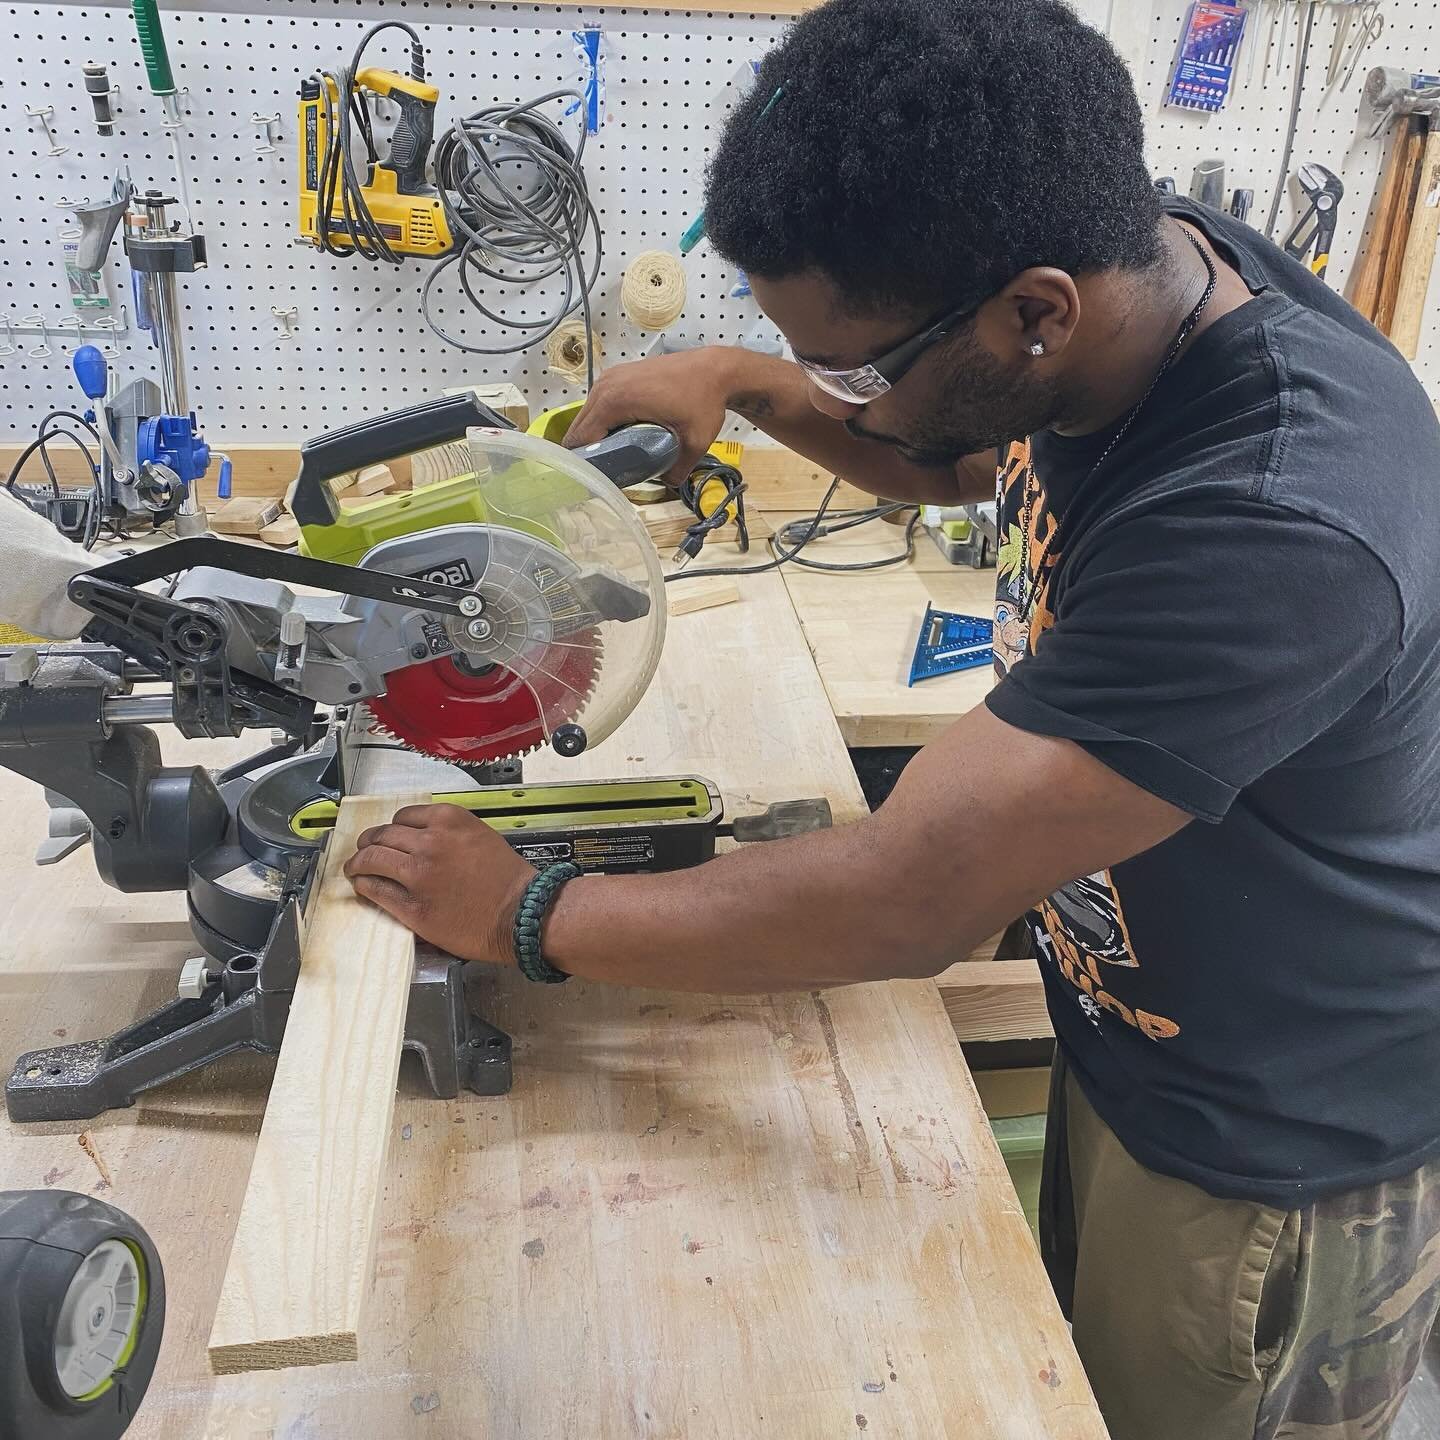 We&rsquo;ve been busy in the wood shop cutting, sanding, staining and assembling handcrafted planter boxes 💪

#cmi #tbi #communicaremichiganllc #utica #troy #tcb #grandrapids #woodworking #woodshop #hardwork